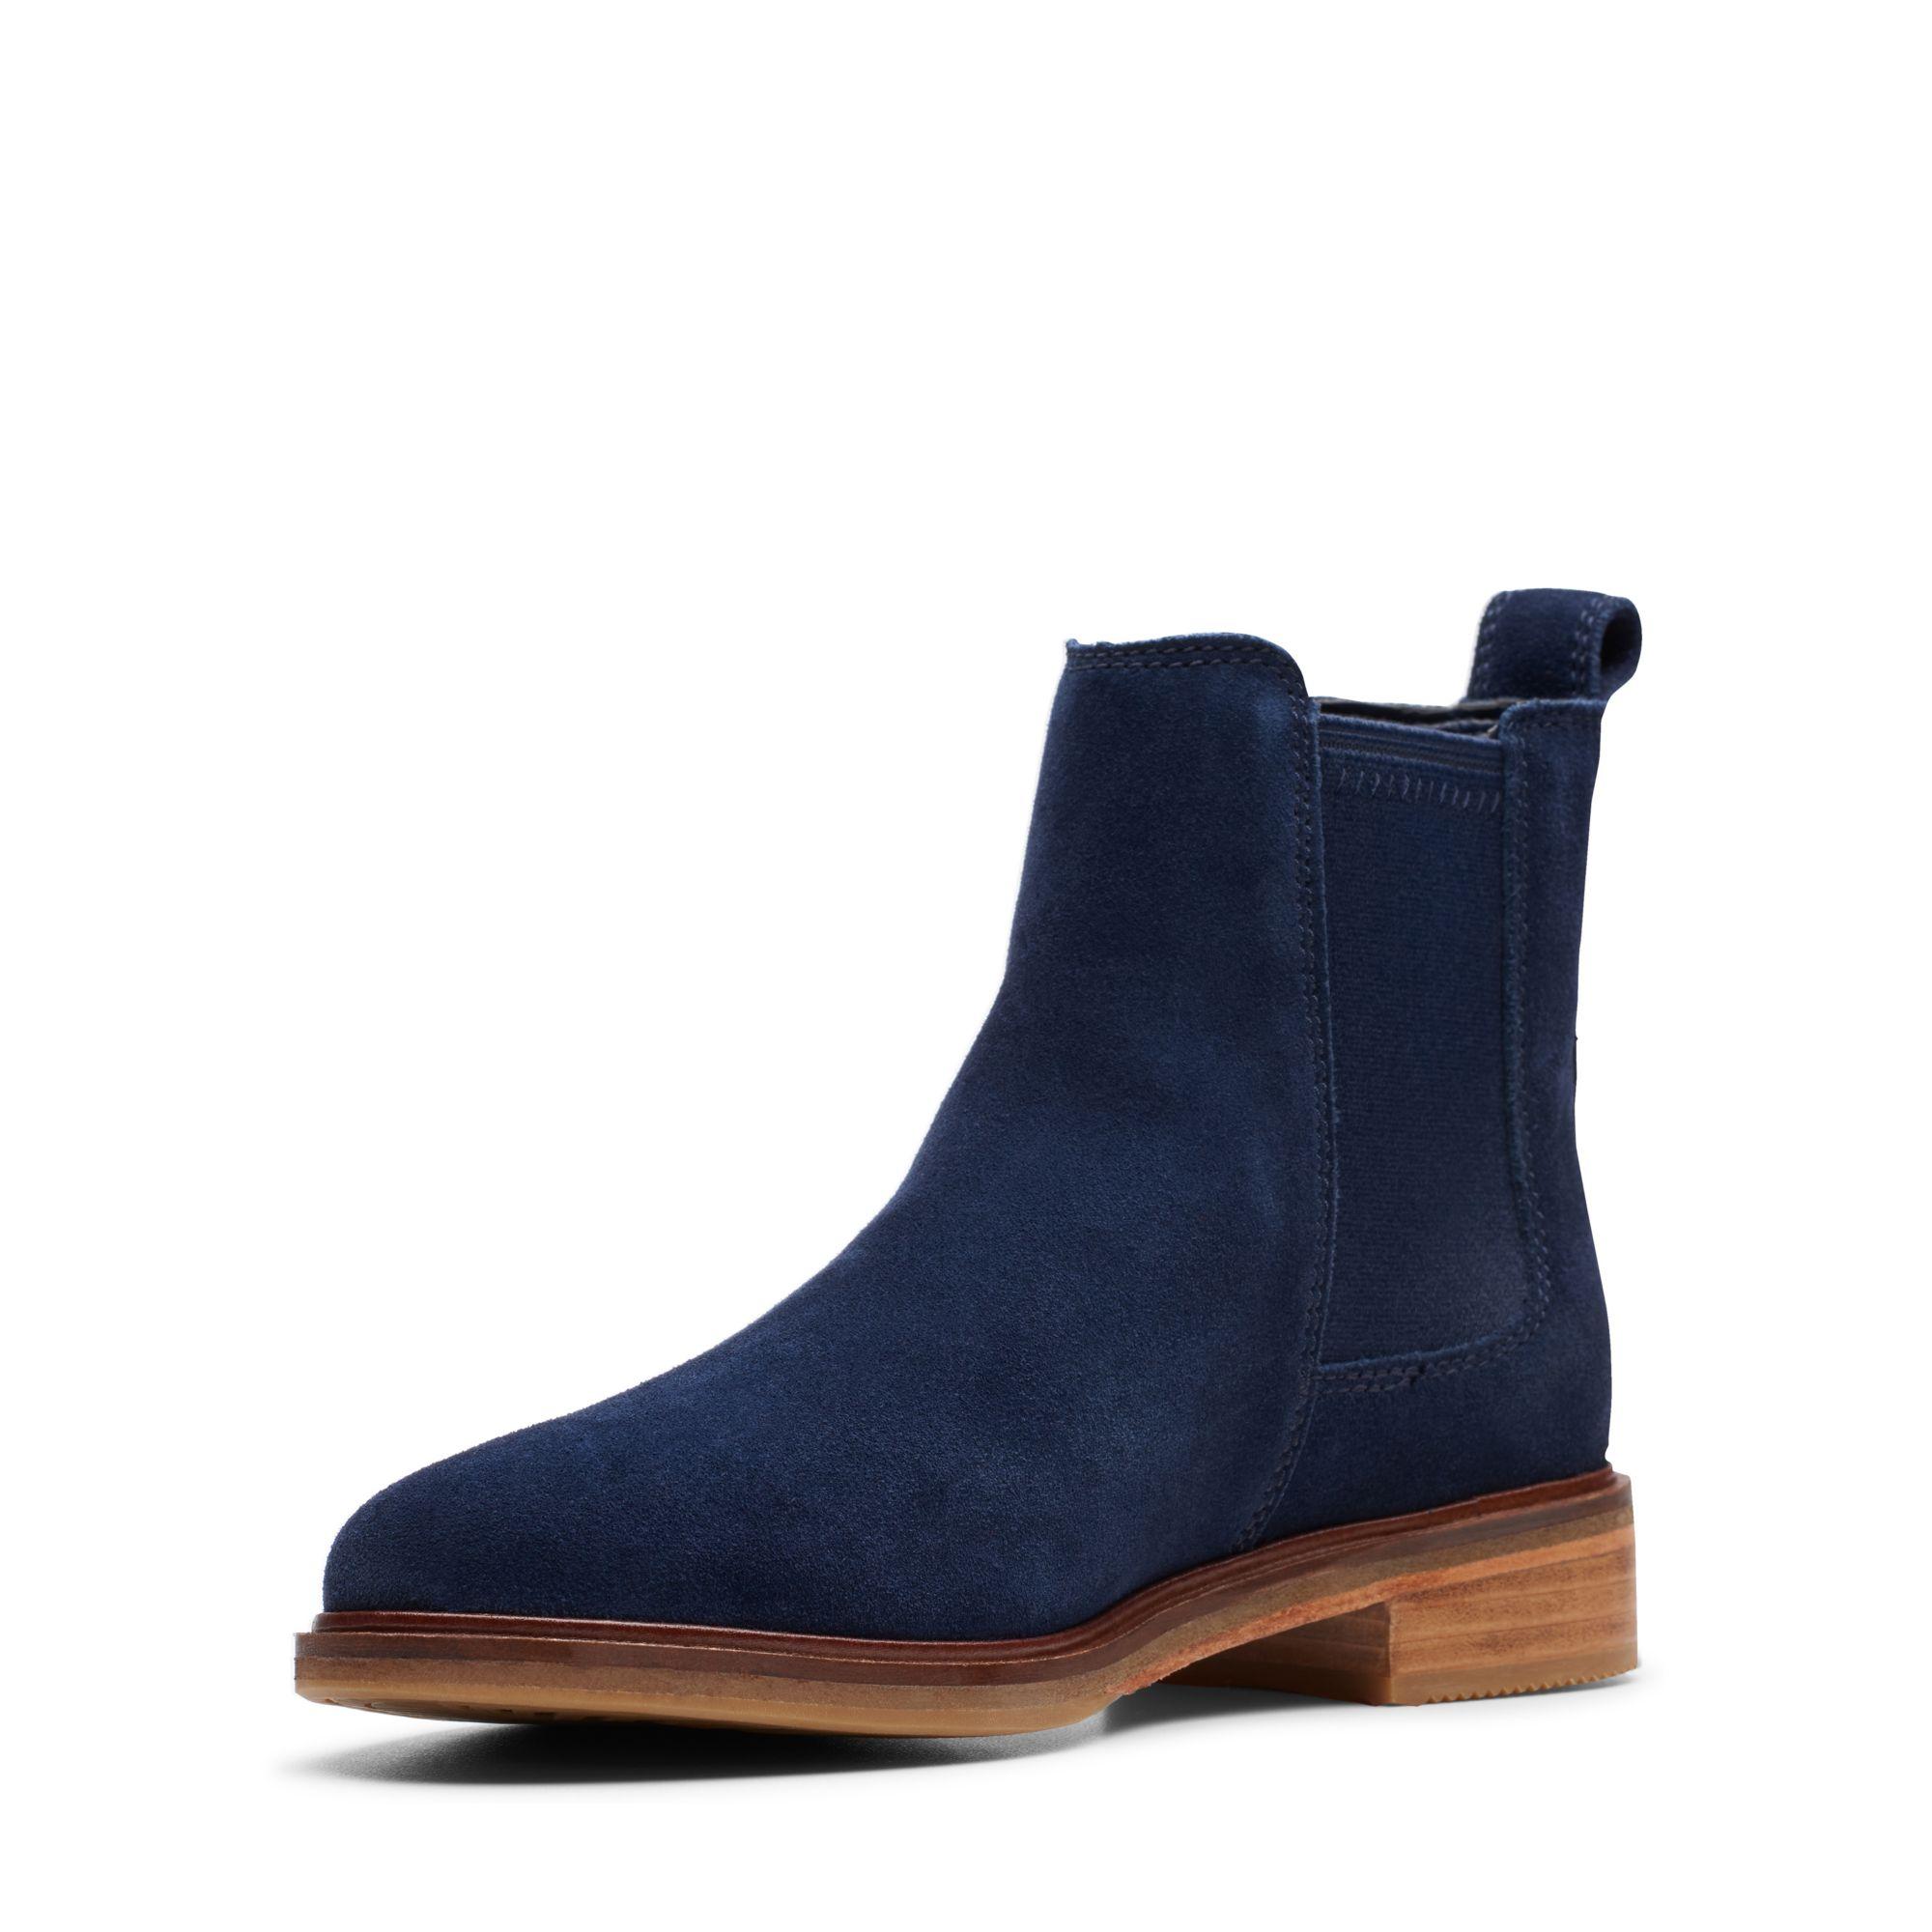 clarks navy blue ankle boots